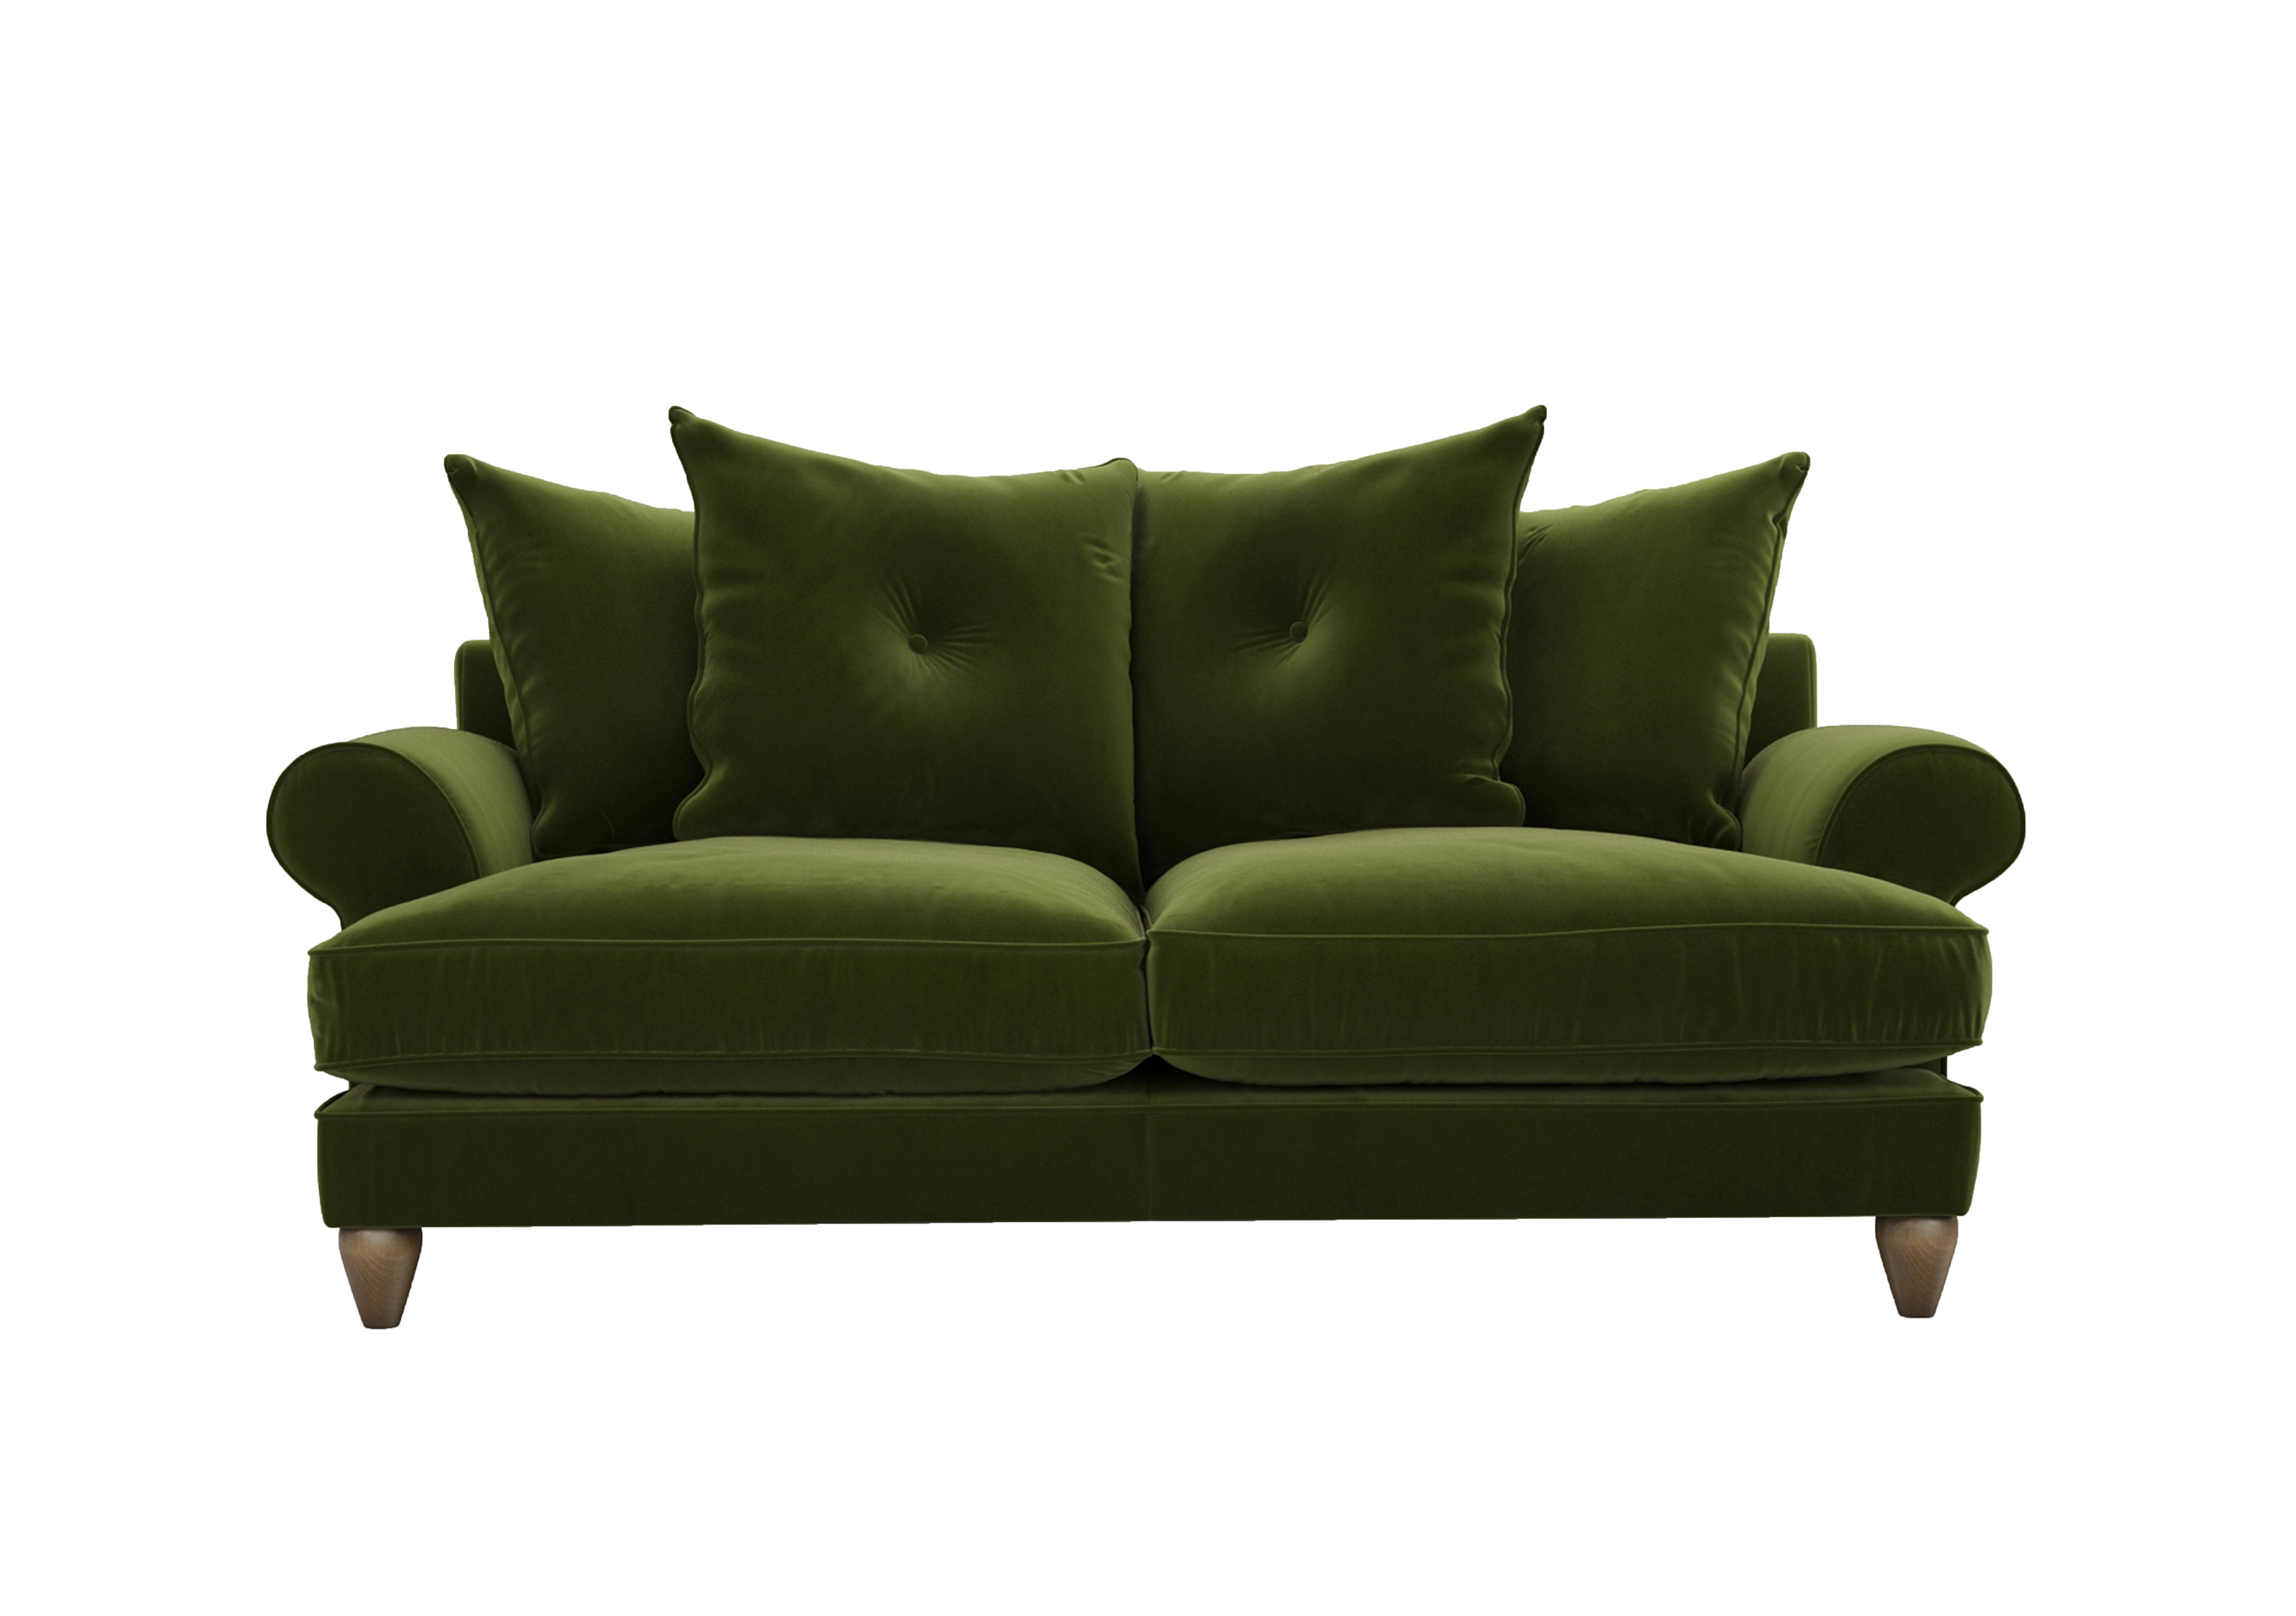 Bronwyn 3 Seater Fabric Scatter Back Sofa in Woo160 Woodland Moss on Furniture Village